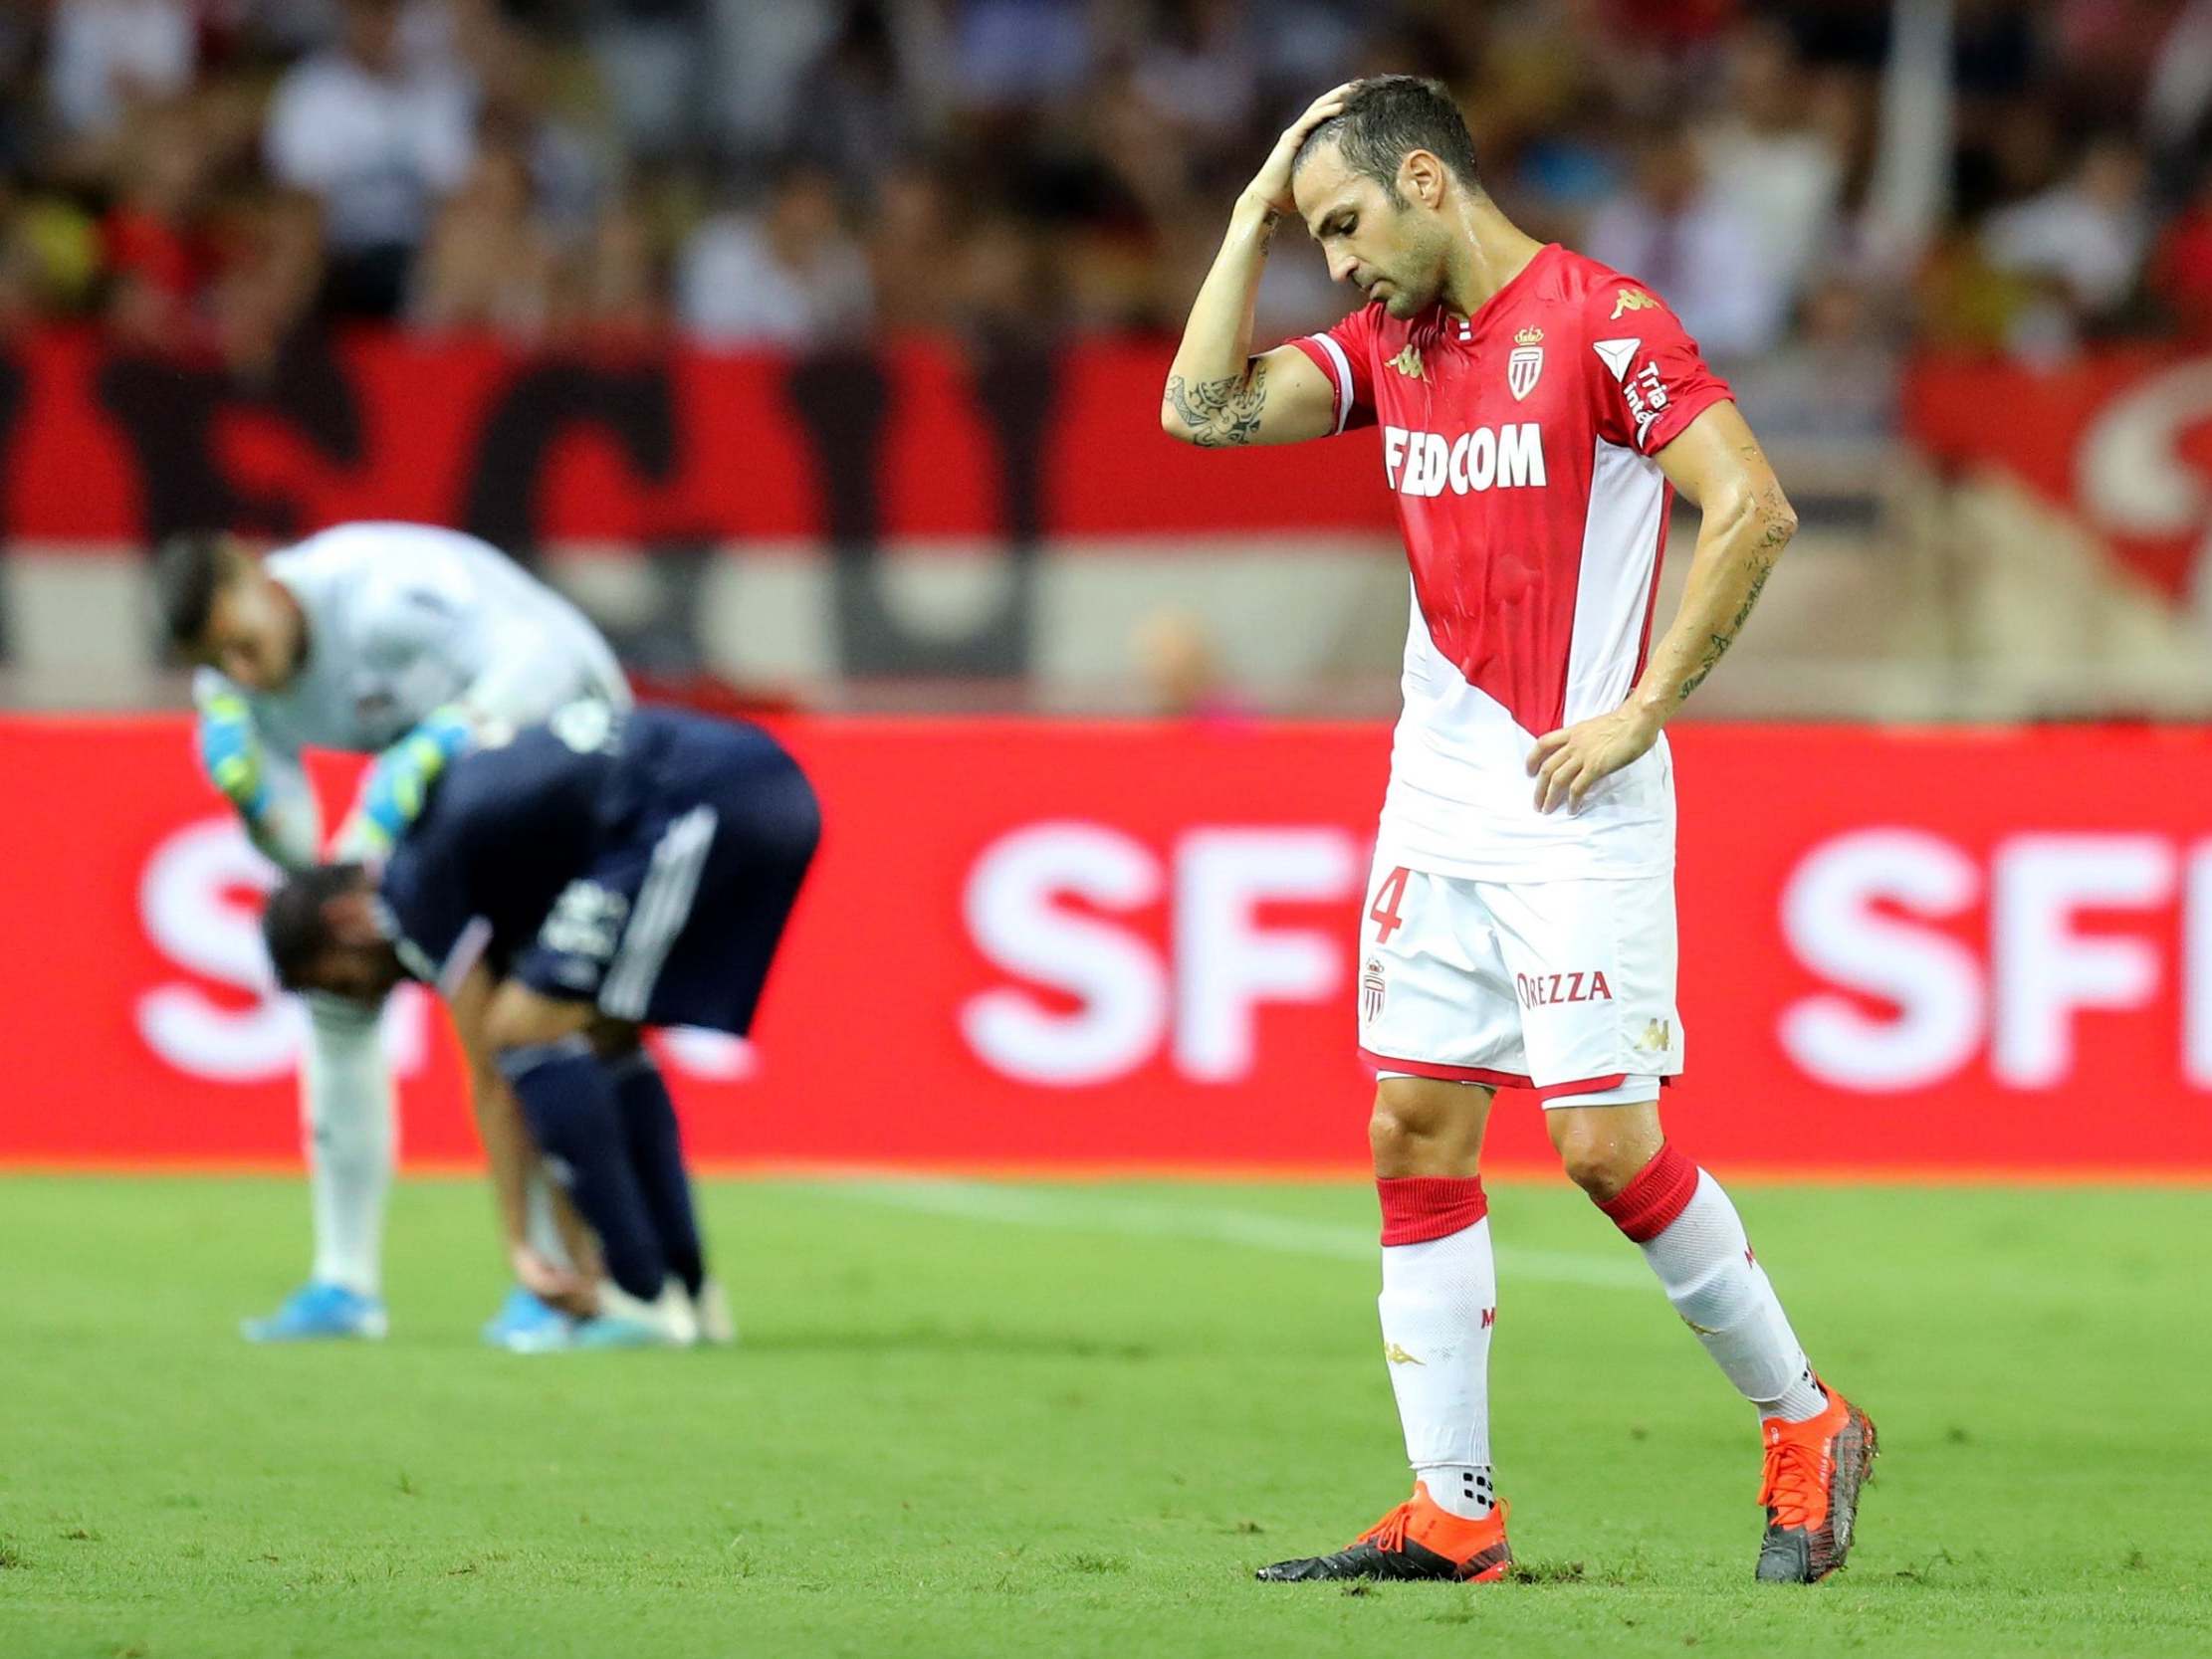 The Monaco midfielder could not believe the decision